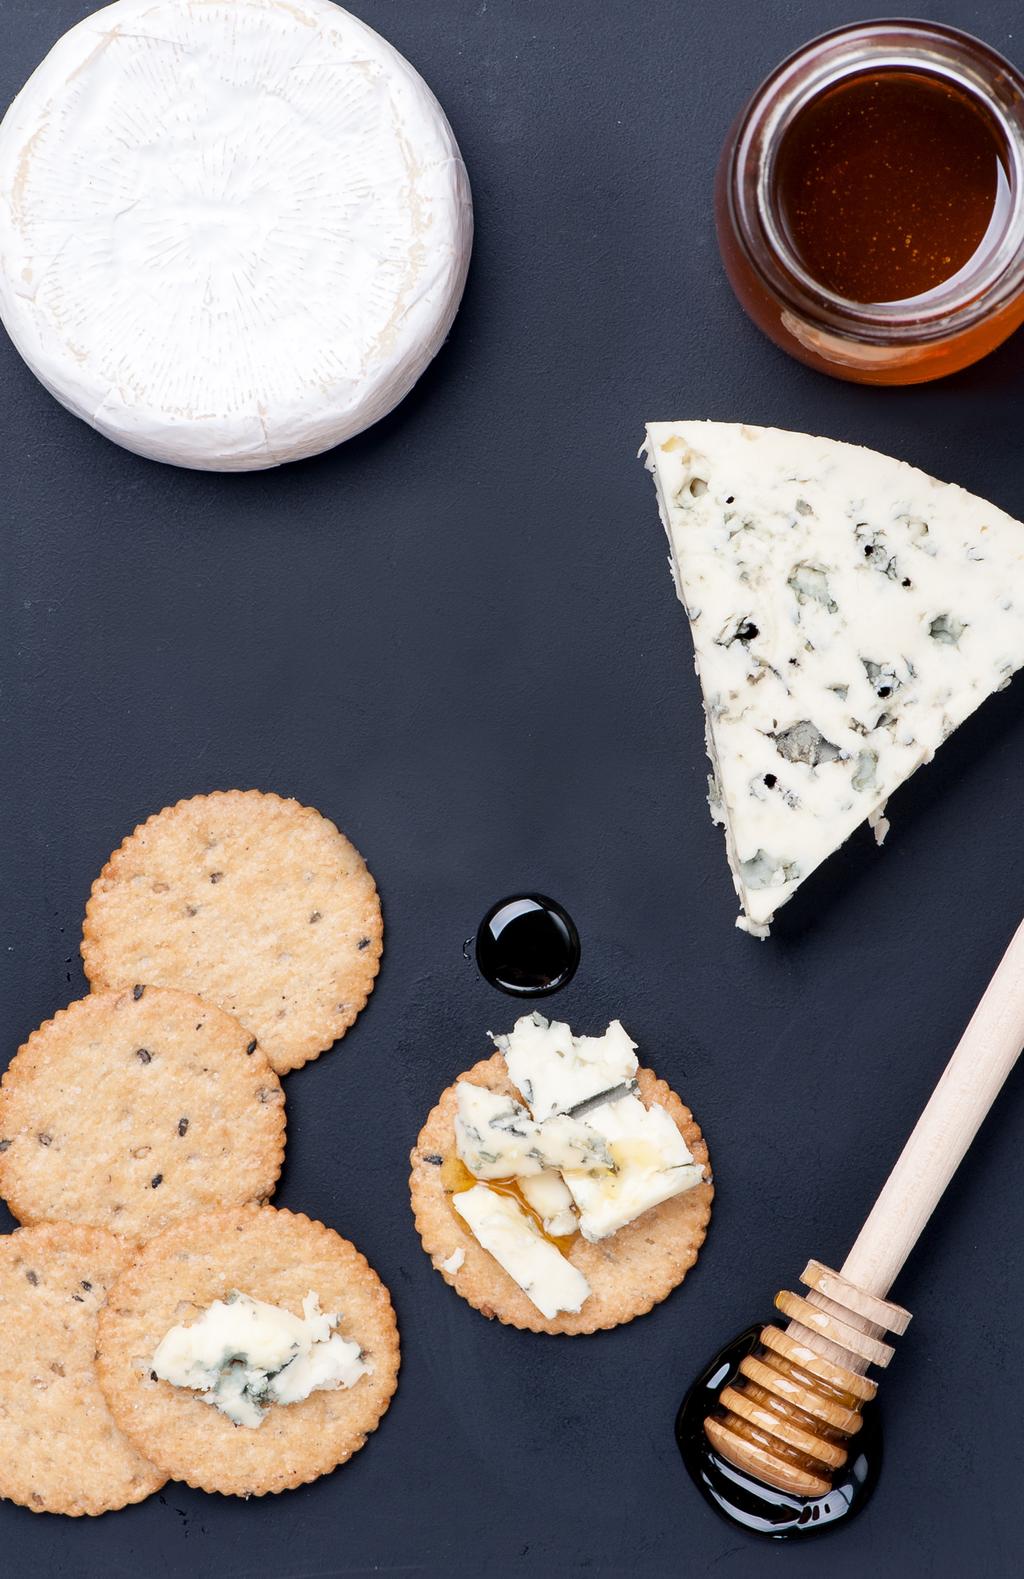 Cheese has always been an important part of my diet, whether it s large curd cottage cheese, soft homemade ricotta cheese, or the vast array of beautiful, cultured cheeses.